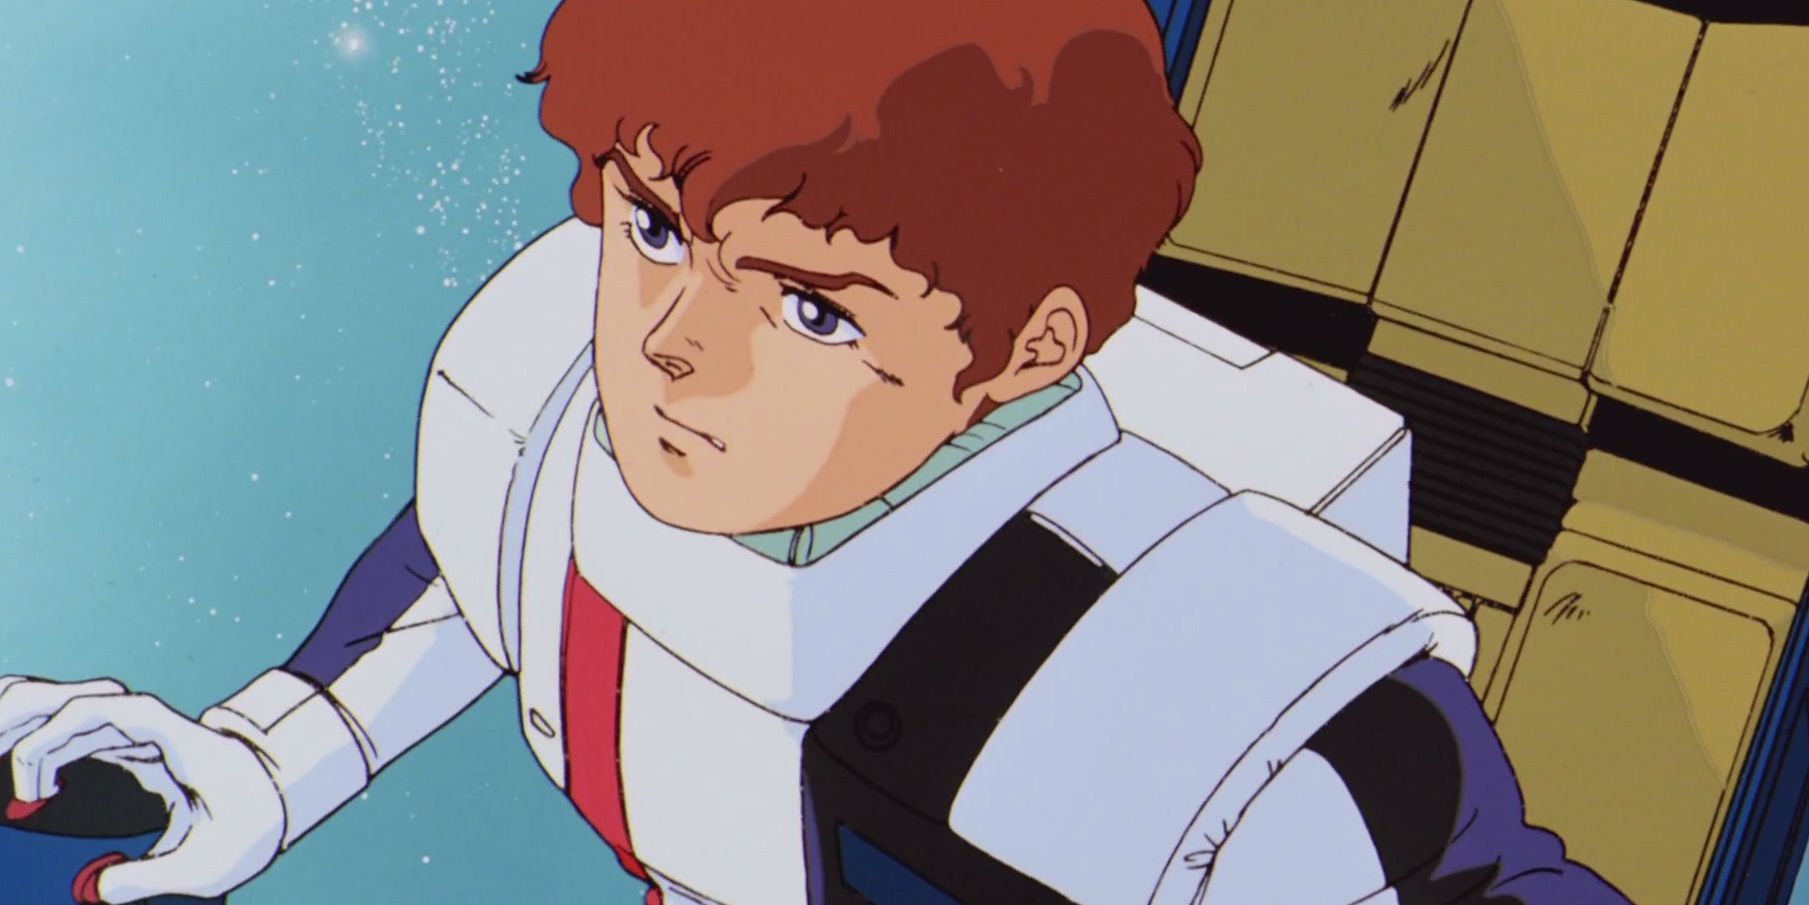 Amuro Ray from Mobile Suit Gundam